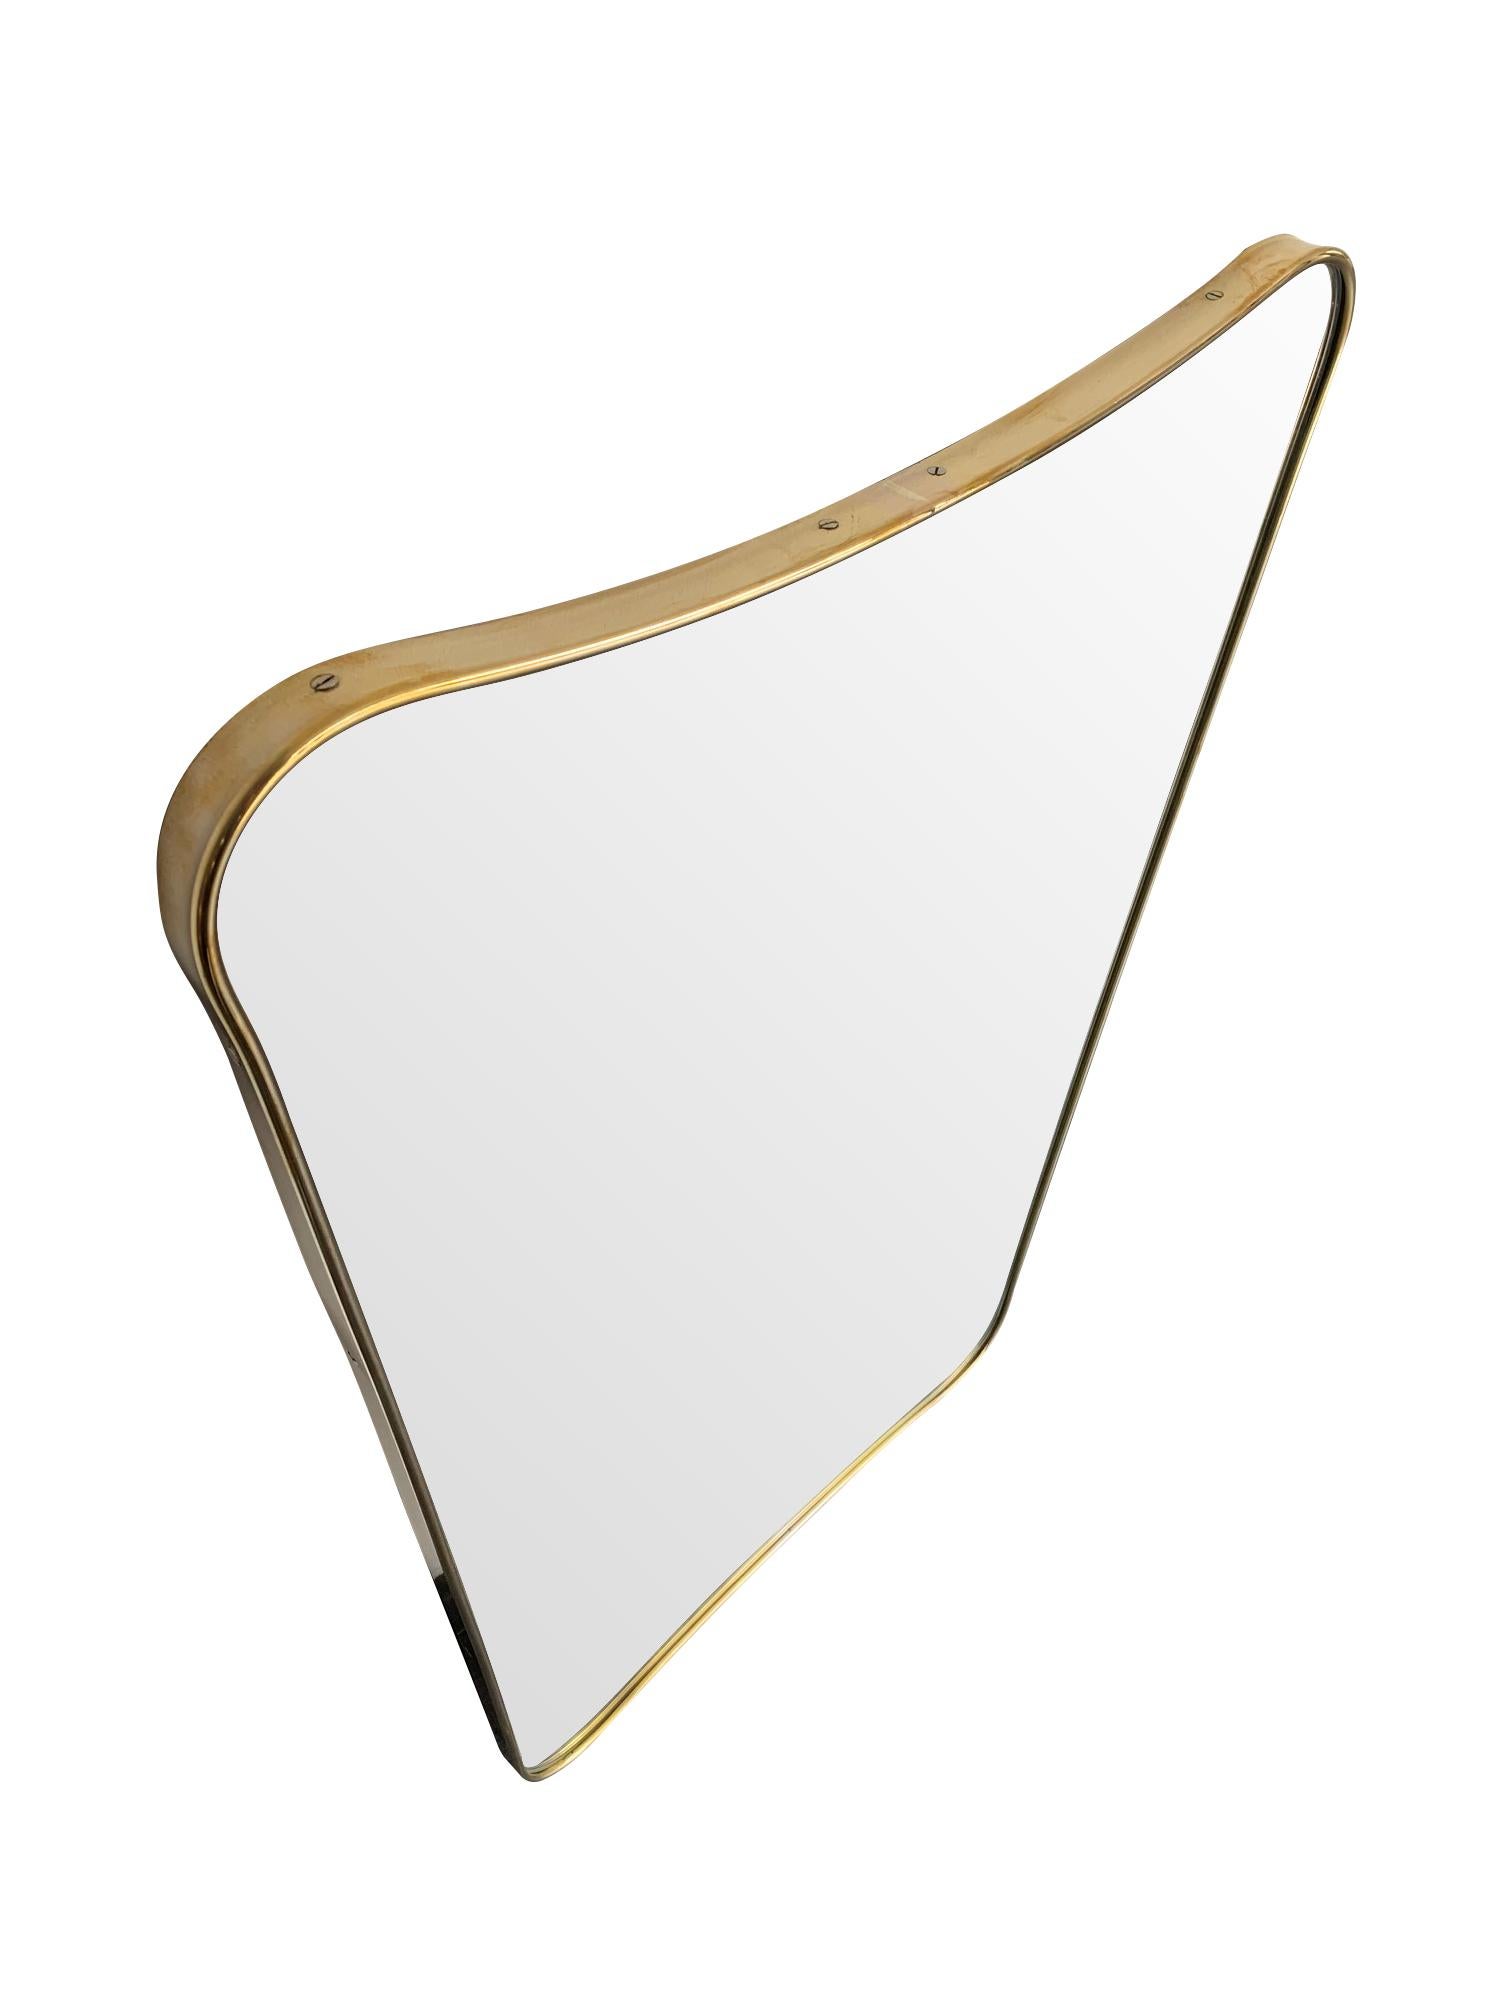 Mid-Century Modern Italian Shield Mirror with Brass Surround in the Style of Gio Ponti